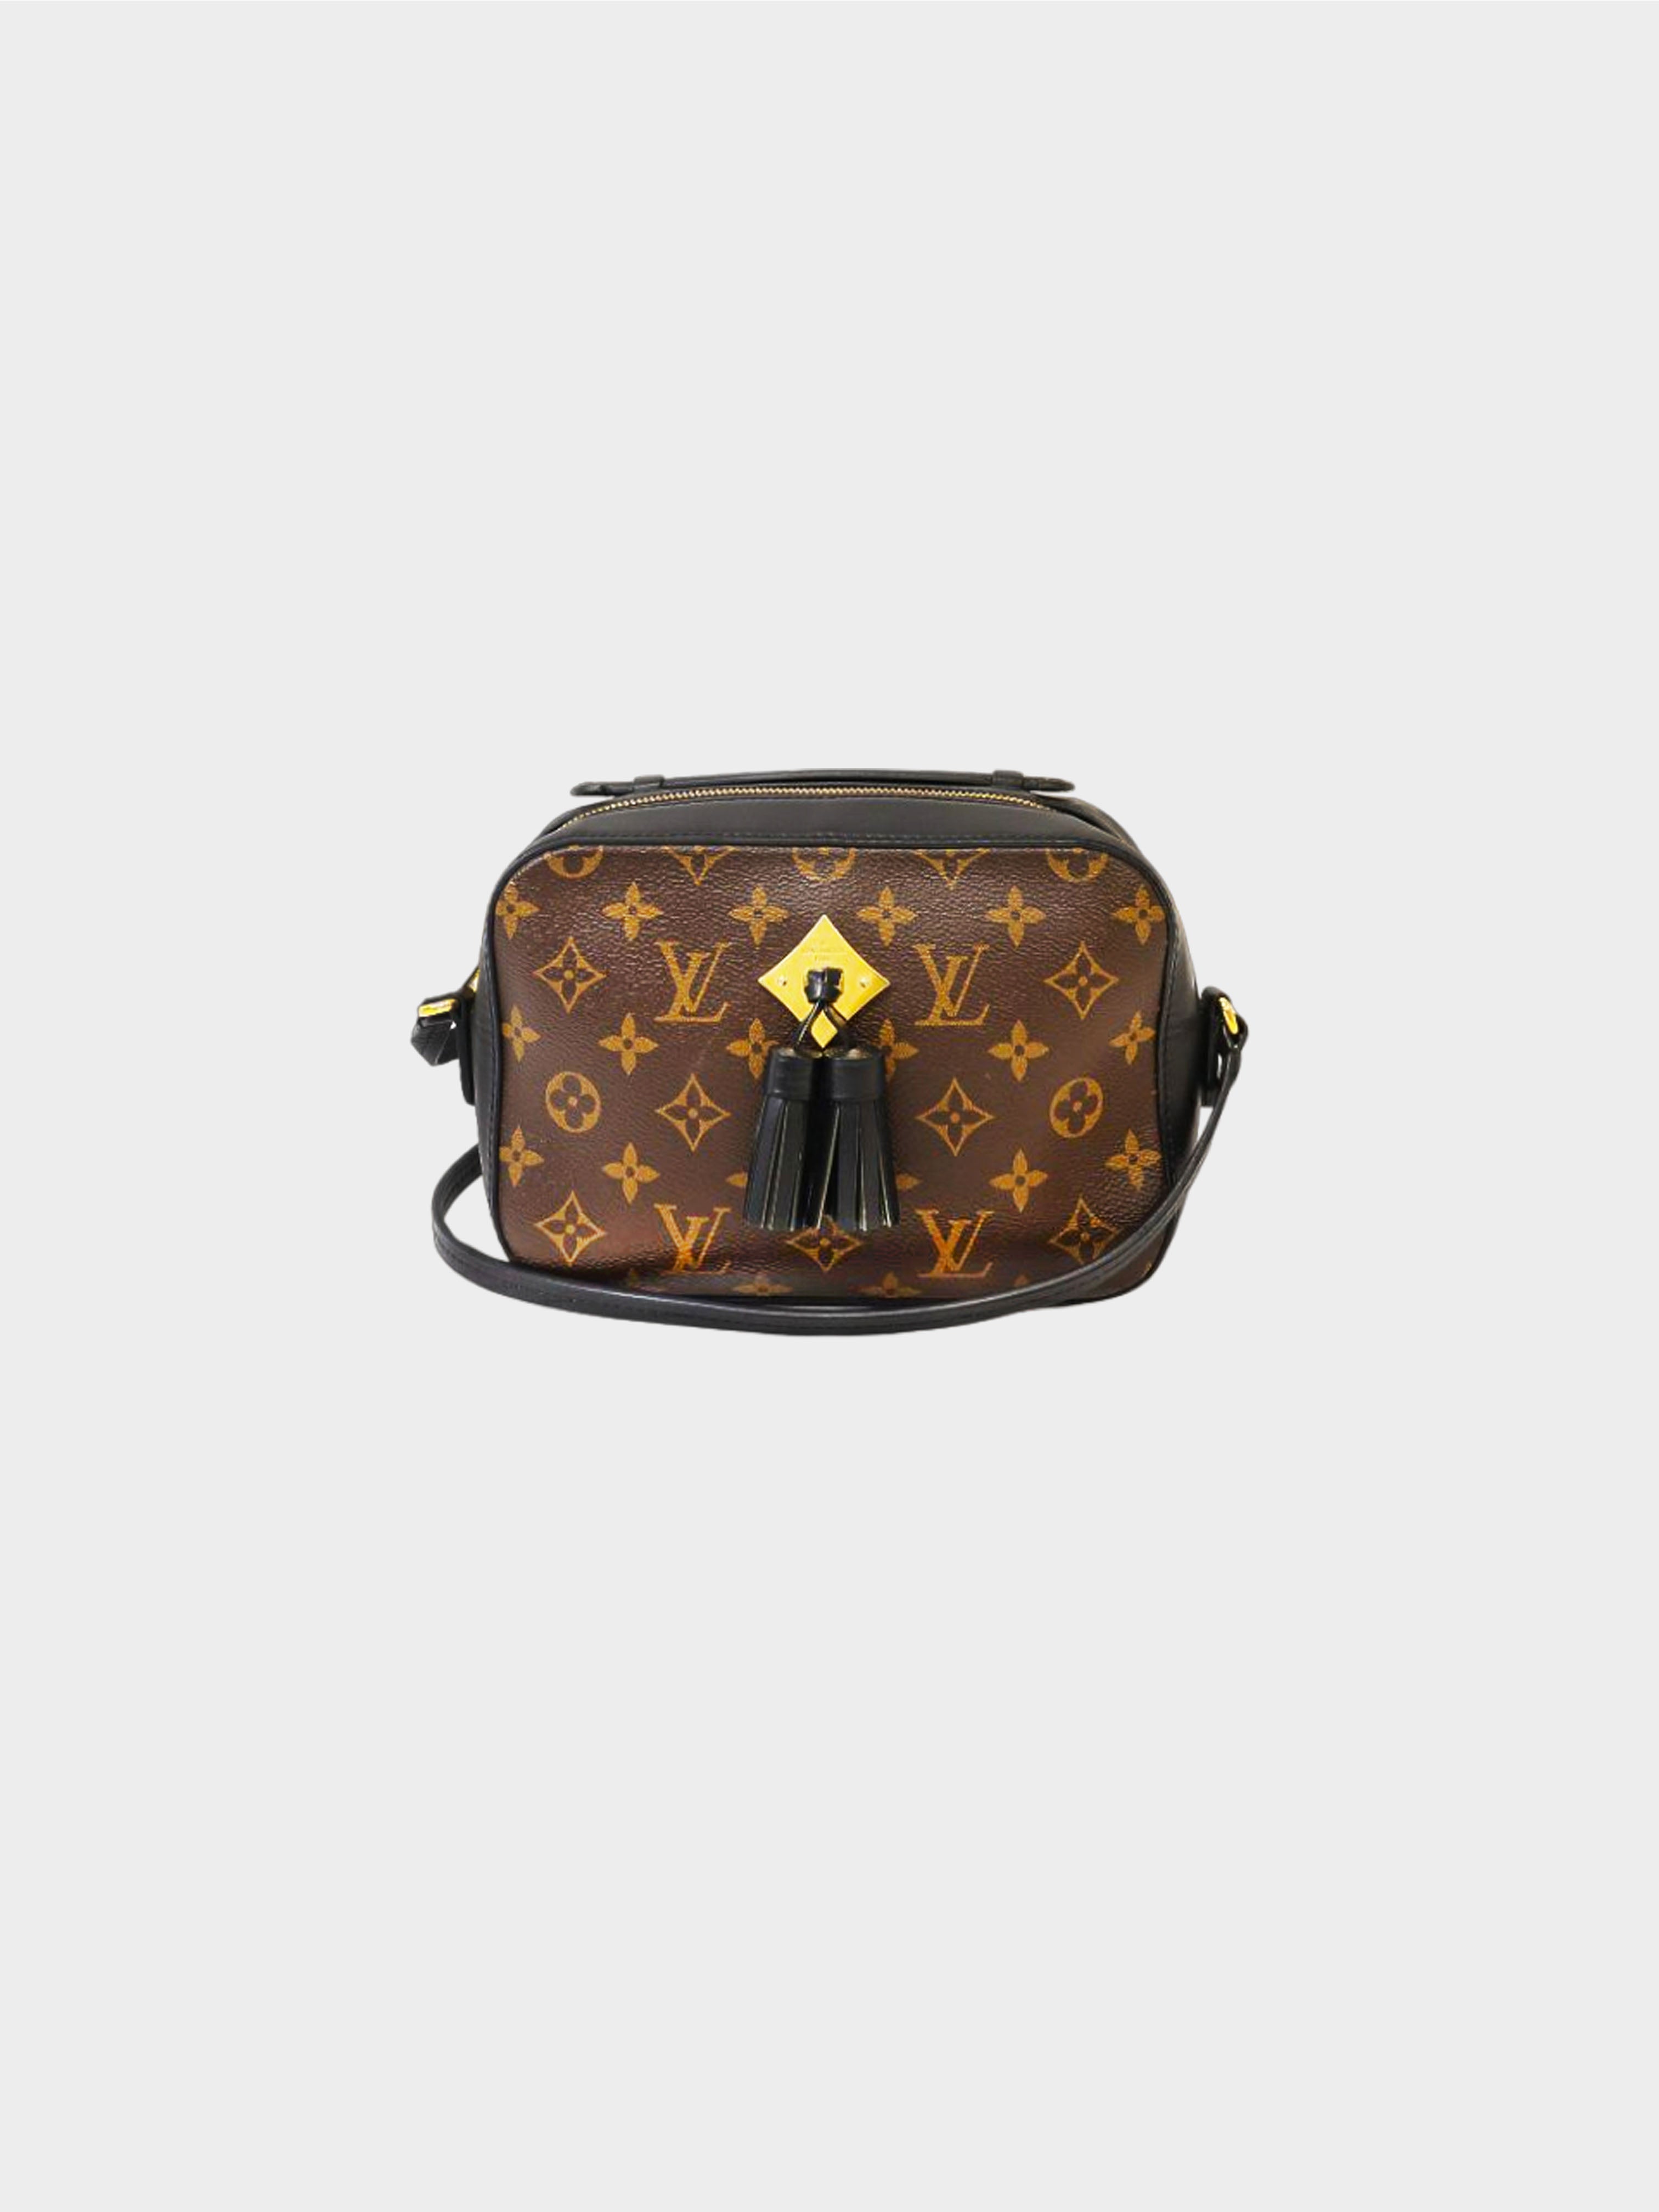 Black Monogram Multicolor Limited Edition Eye Love You Bow Bag Gold  Hardware, 2003, Fashion Through Time, 2021